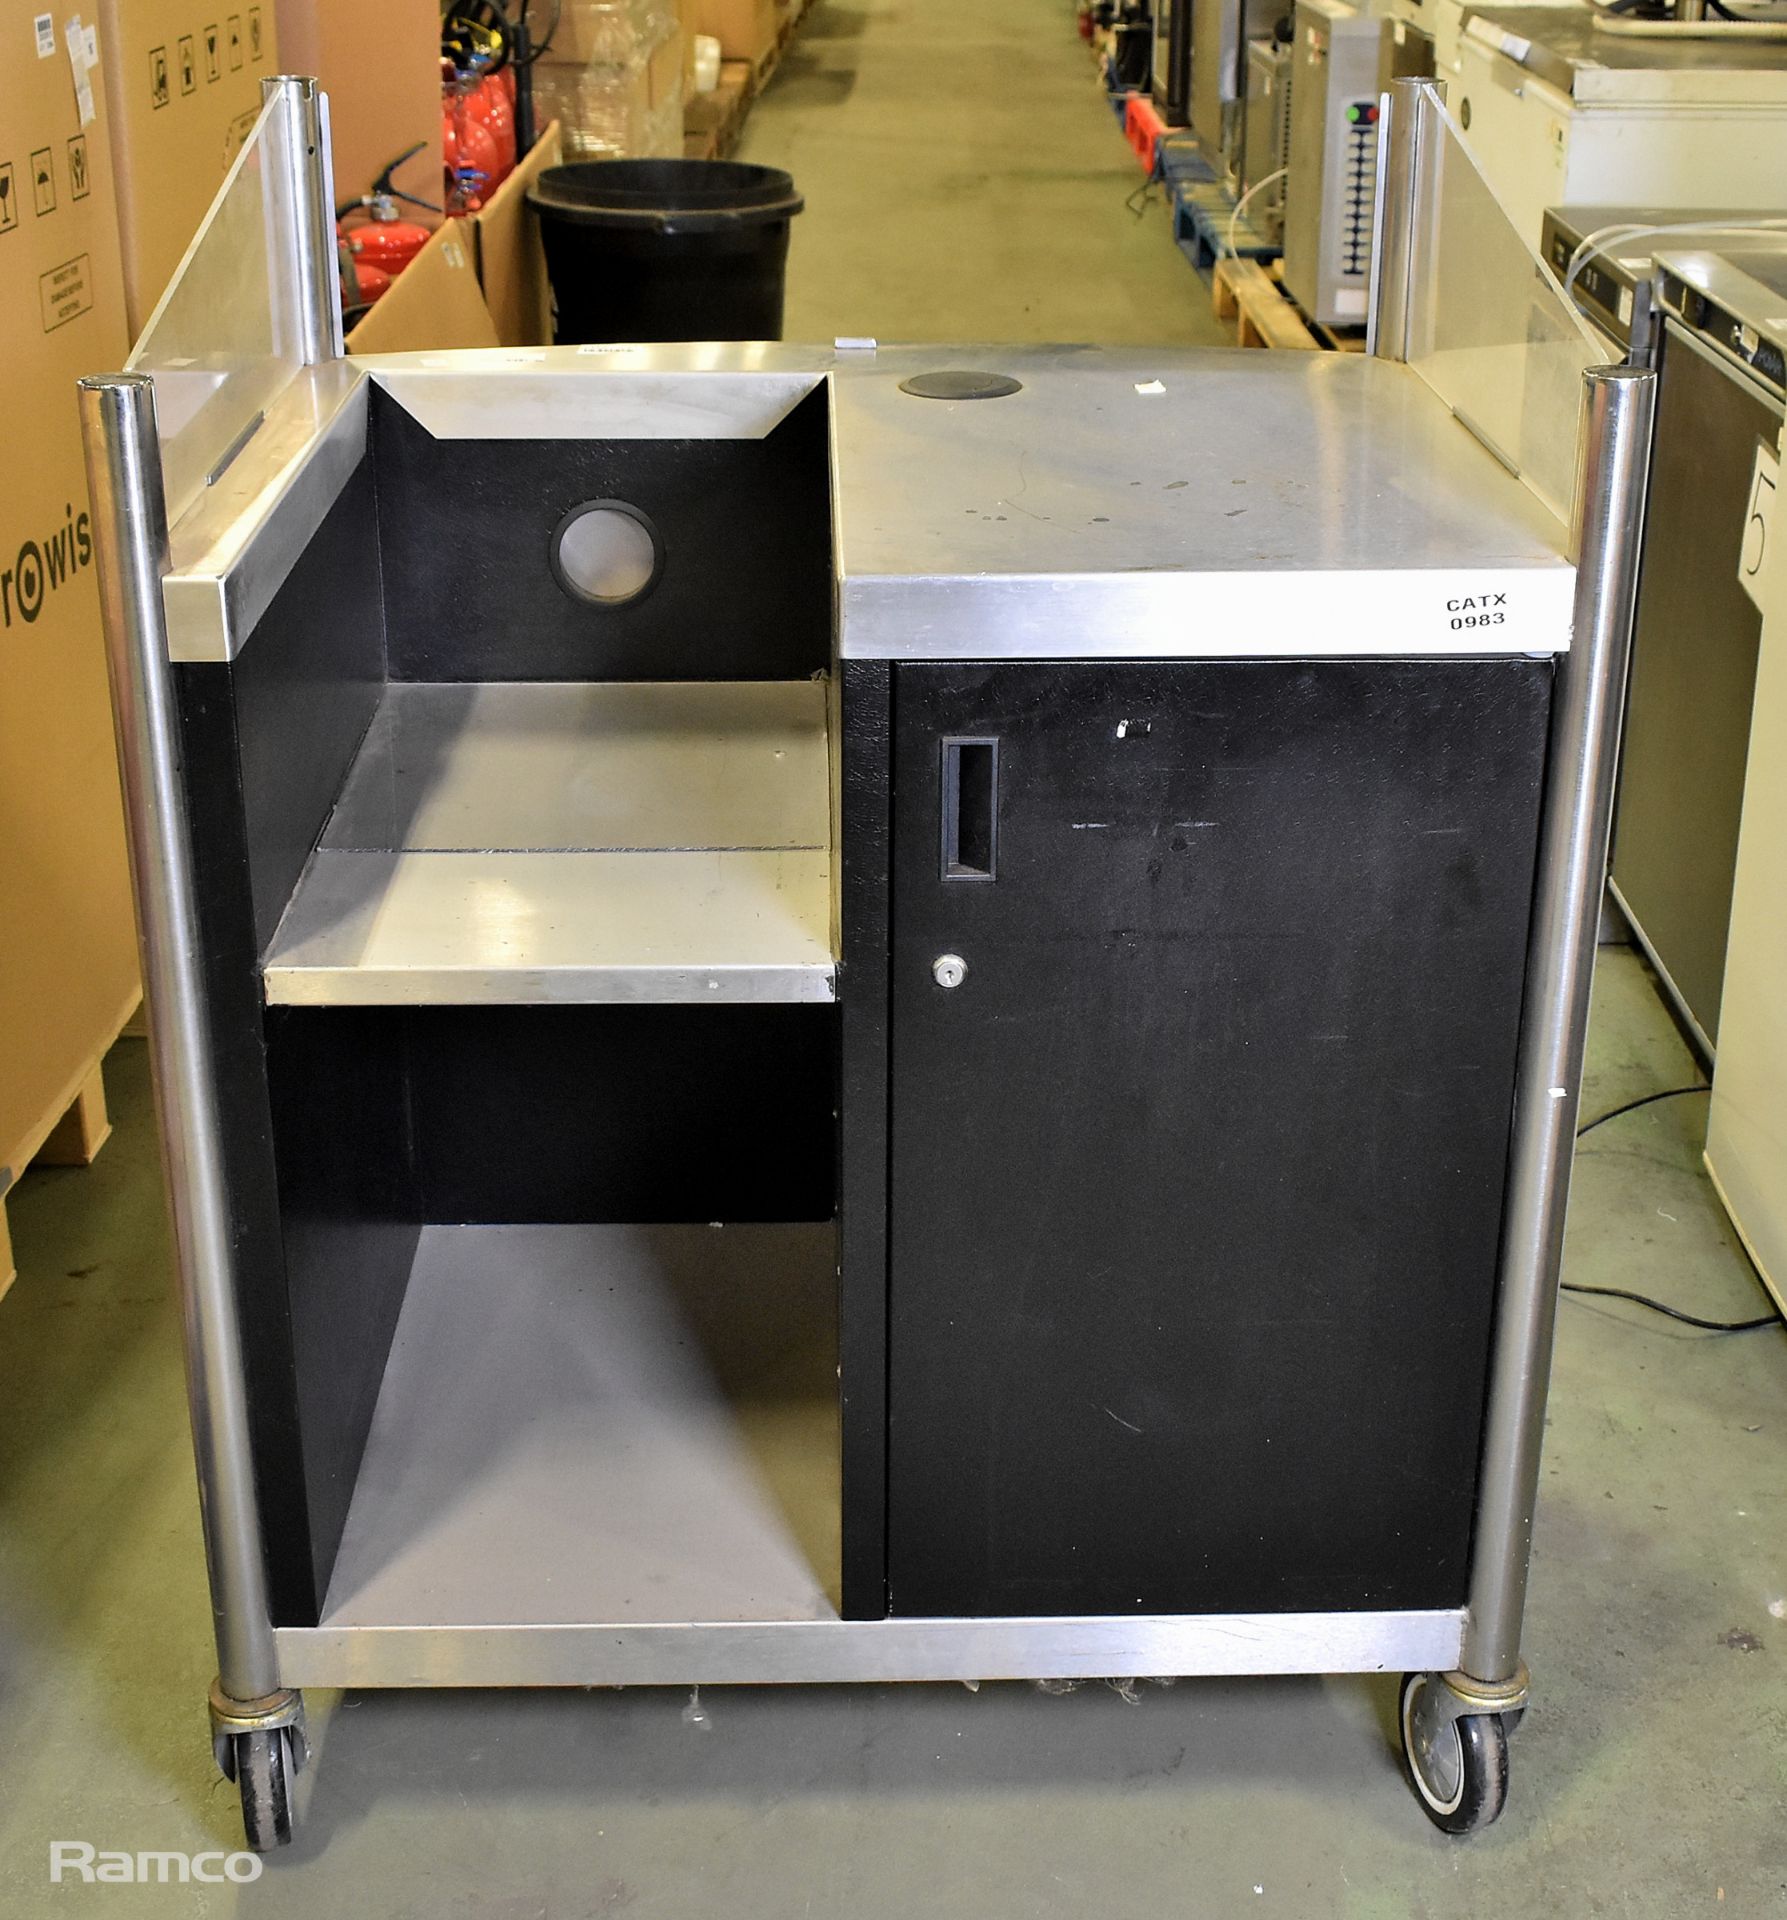 Mobile counter for food service - L900 x D715 x H1140mm - Image 3 of 5